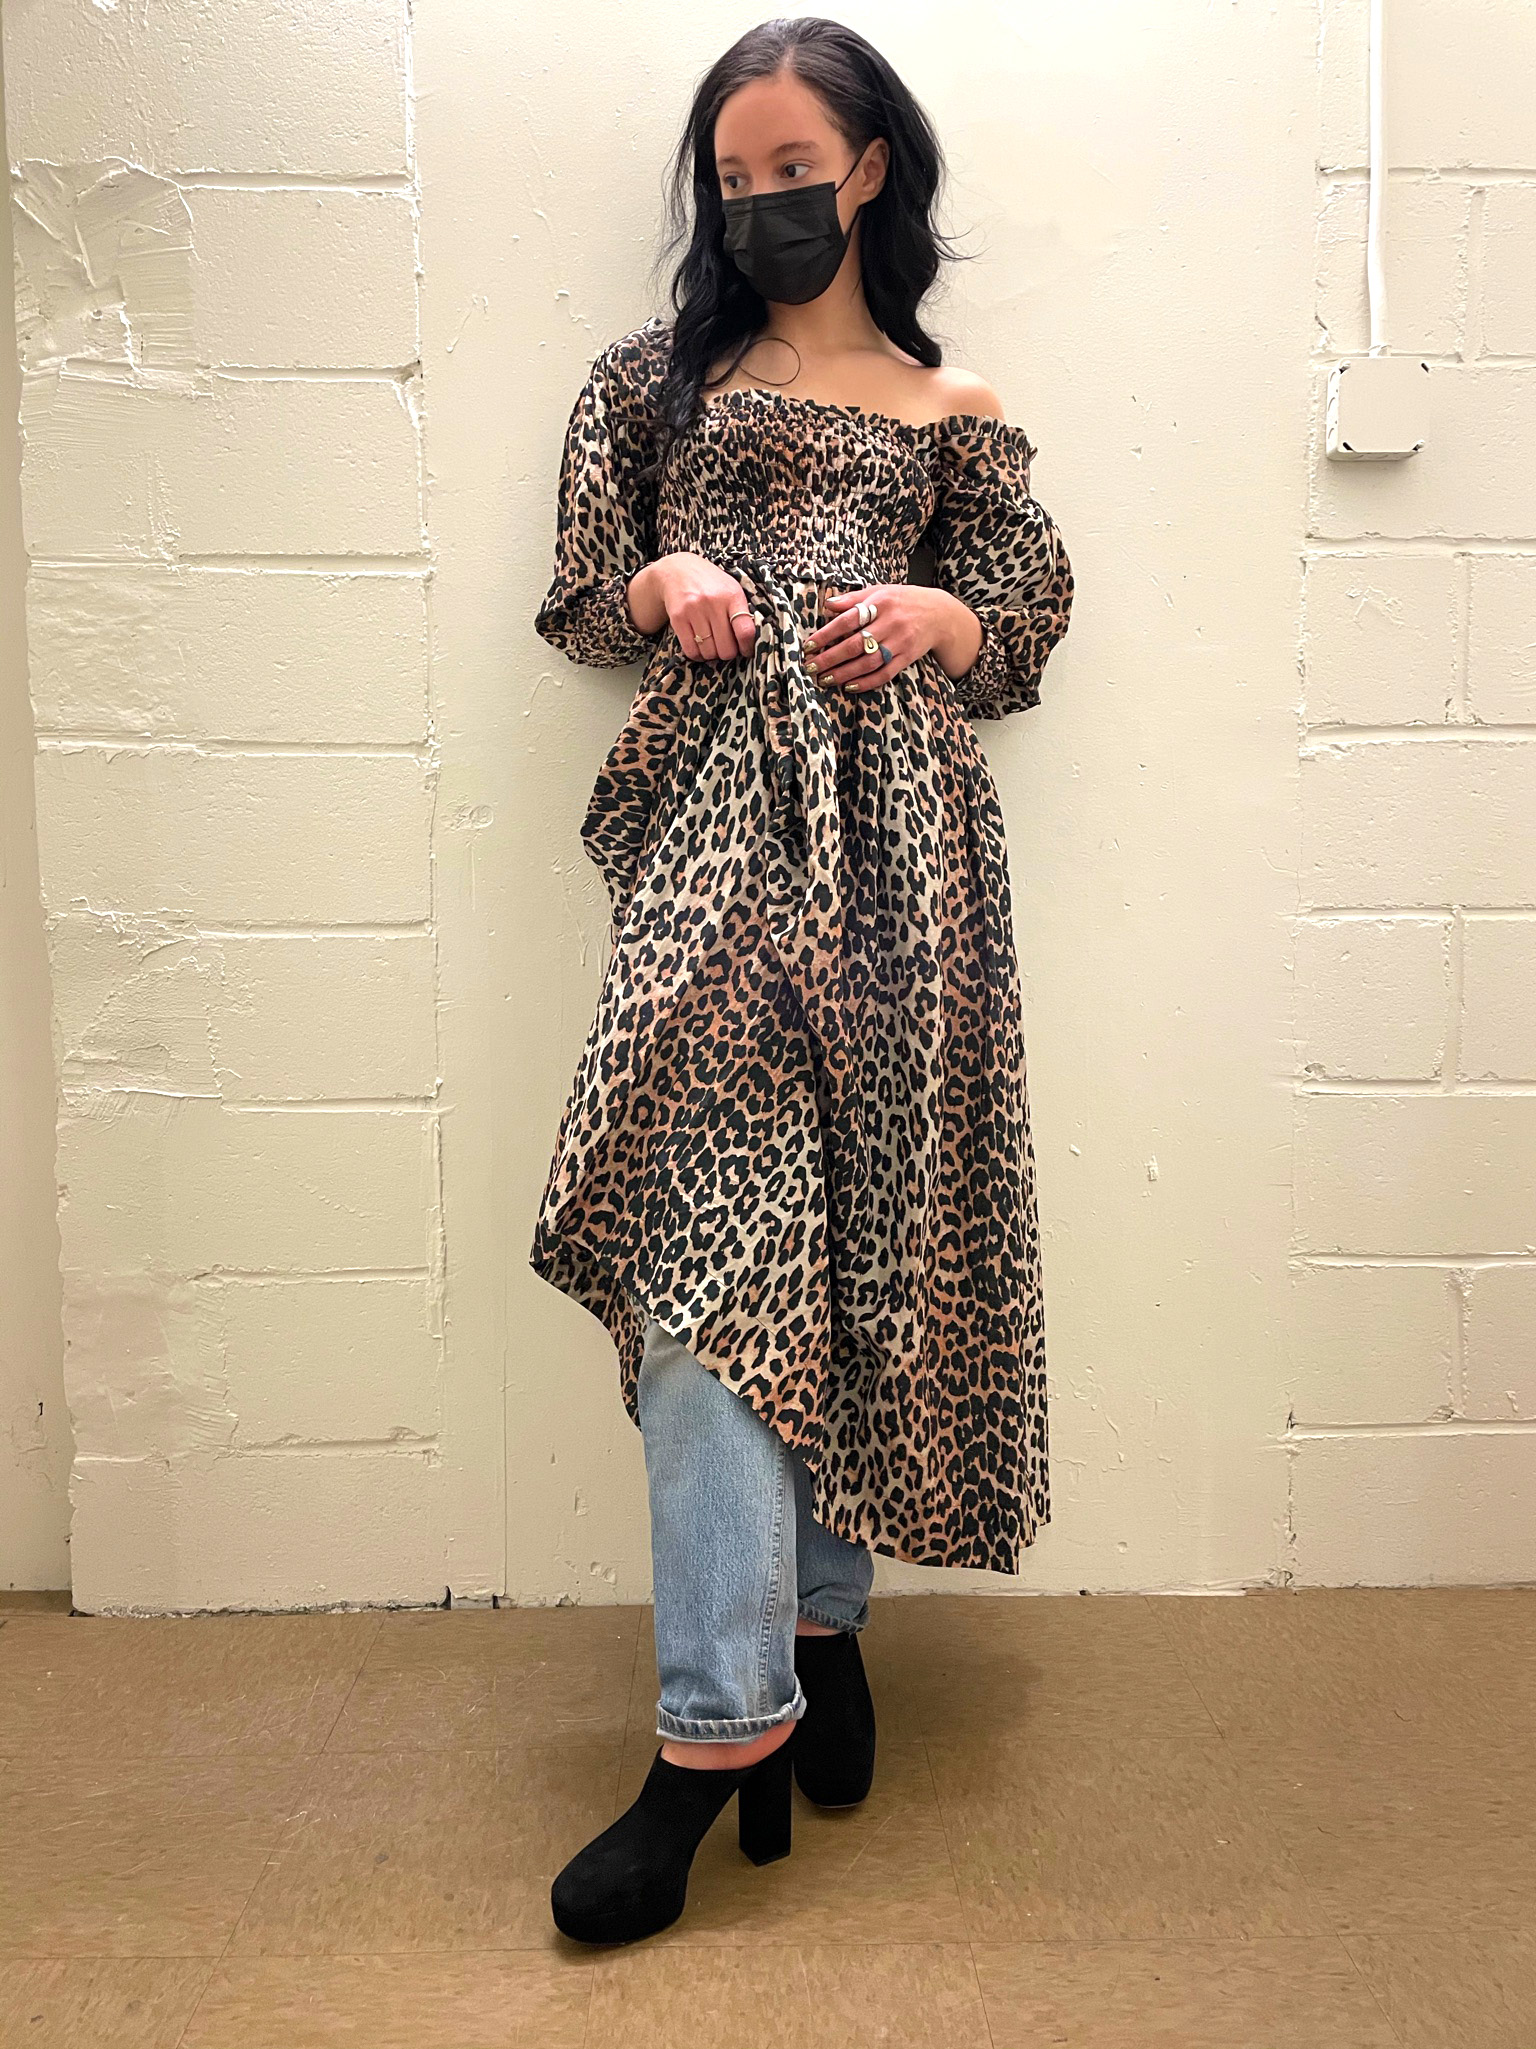 Person standing in front of brick wall wearing leopard print midi dress styled over lightwash jeans and mules